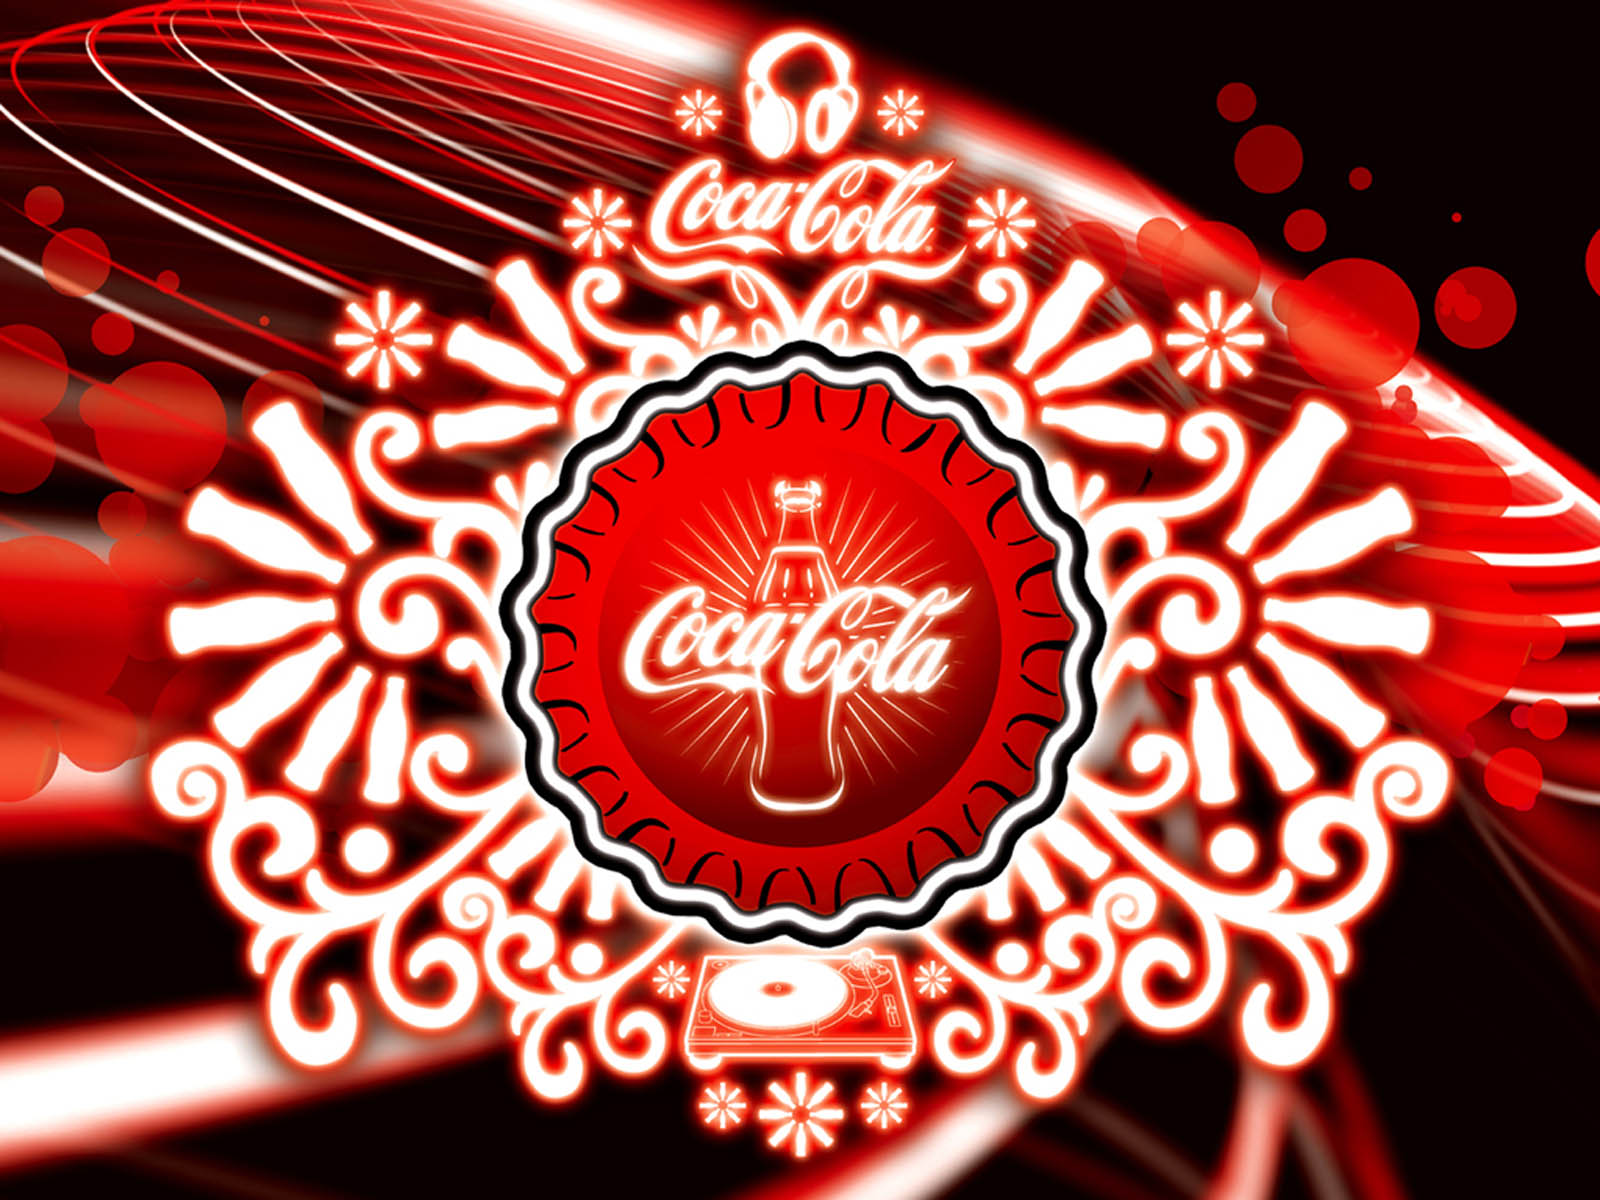 Cola Wallpaper In The Category Of Coca Collection You